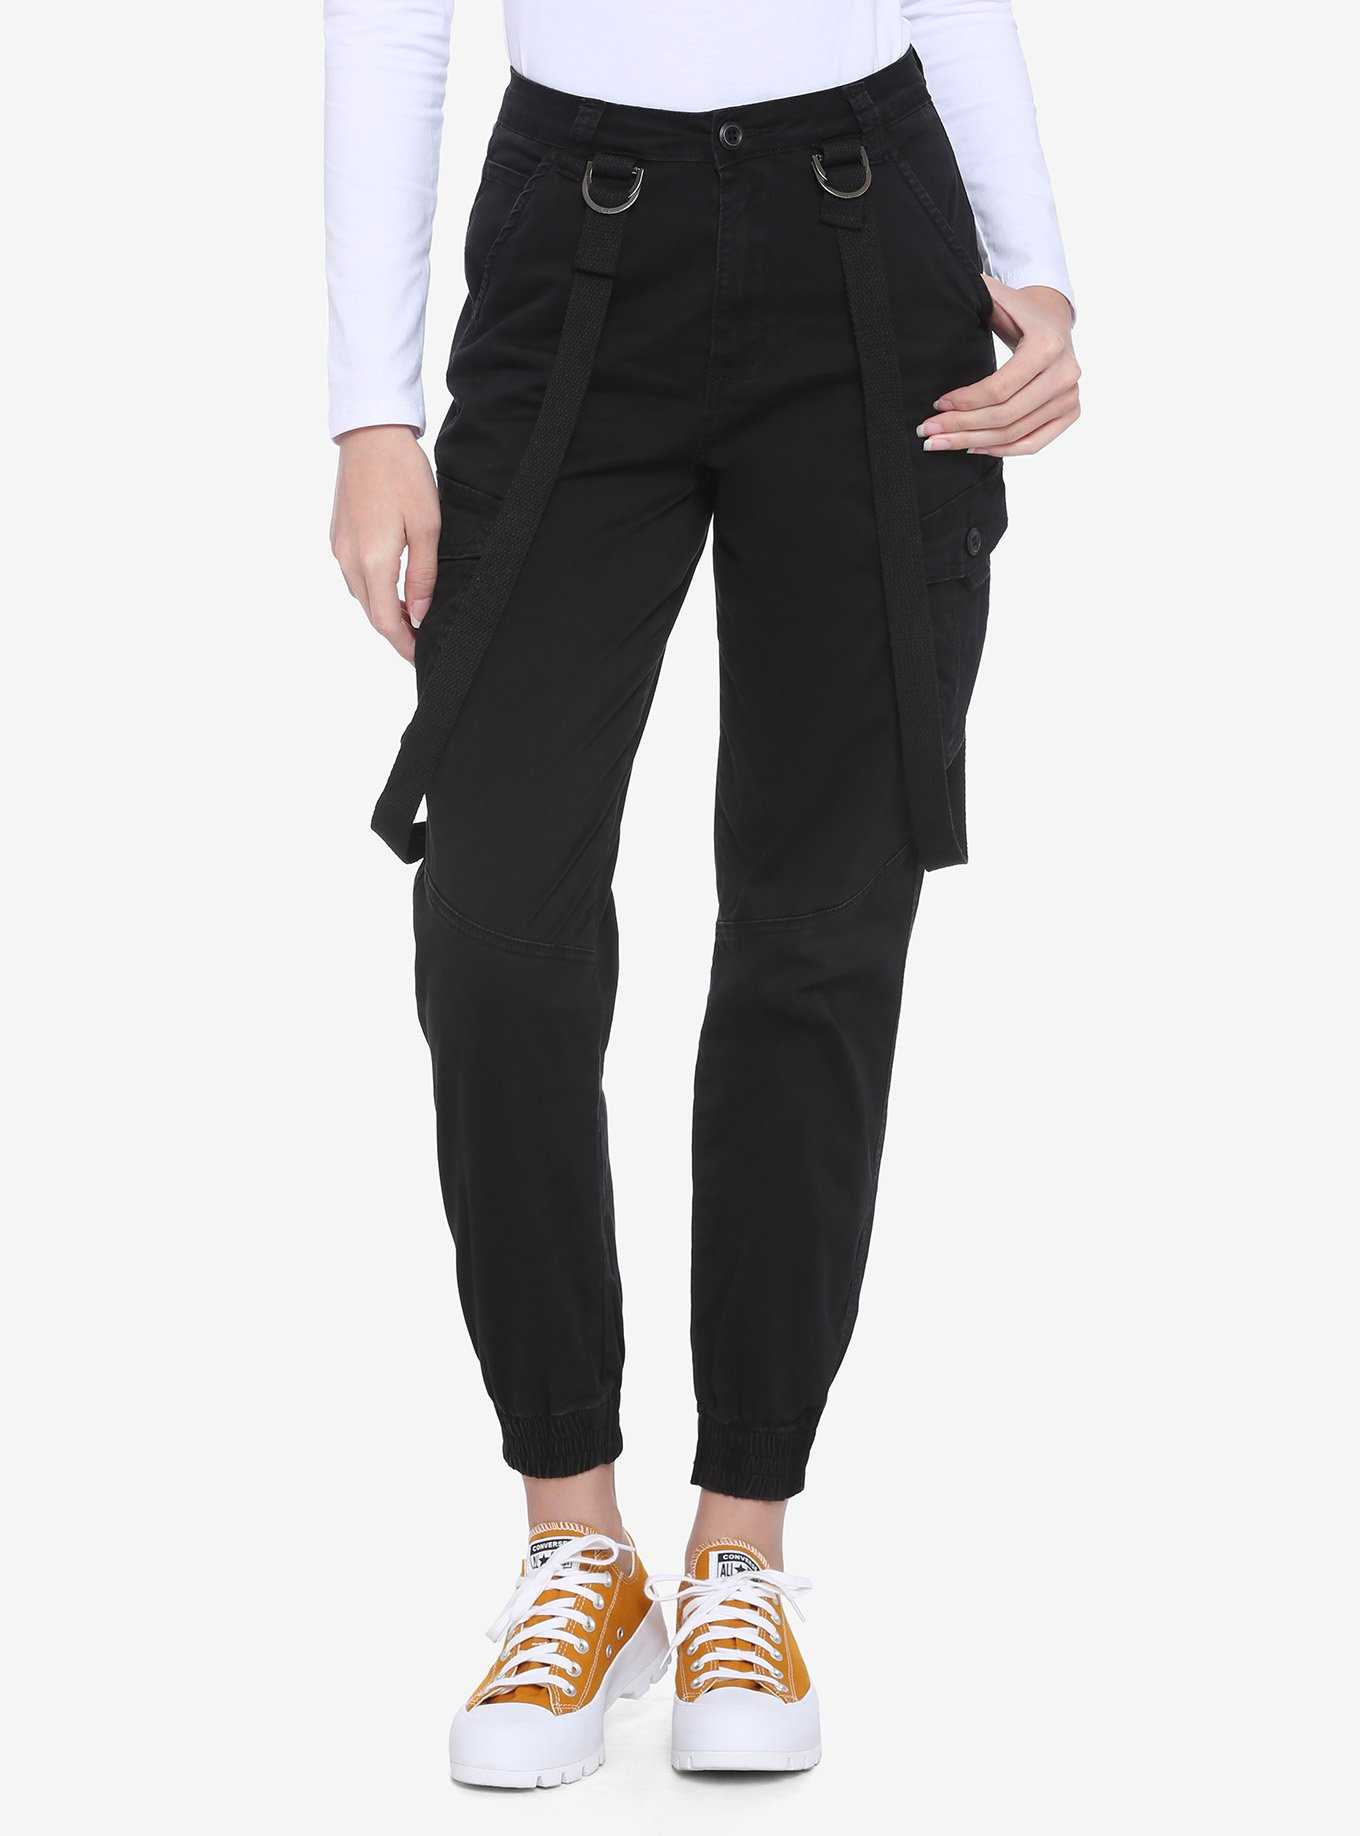 Trending Wholesale suspenders pants for women At Affordable Prices –